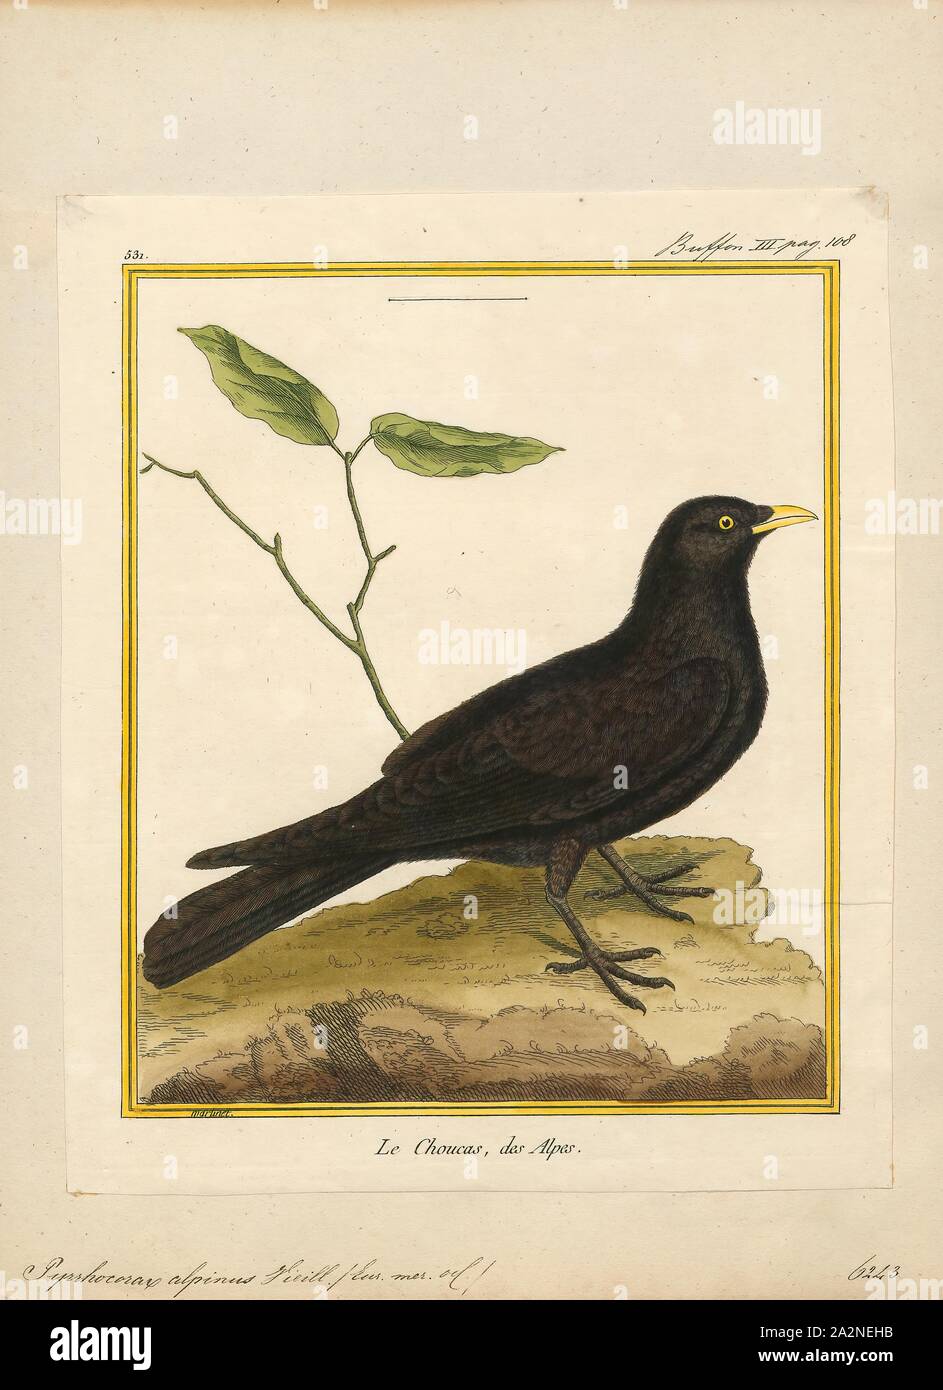 Pyrrhocorax alpinus, Print, The Alpine chough, or yellow-billed chough  (Pyrrhocorax graculus), is a bird in the crow family, one of only two species  in the genus Pyrrhocorax. Its two subspecies breed in